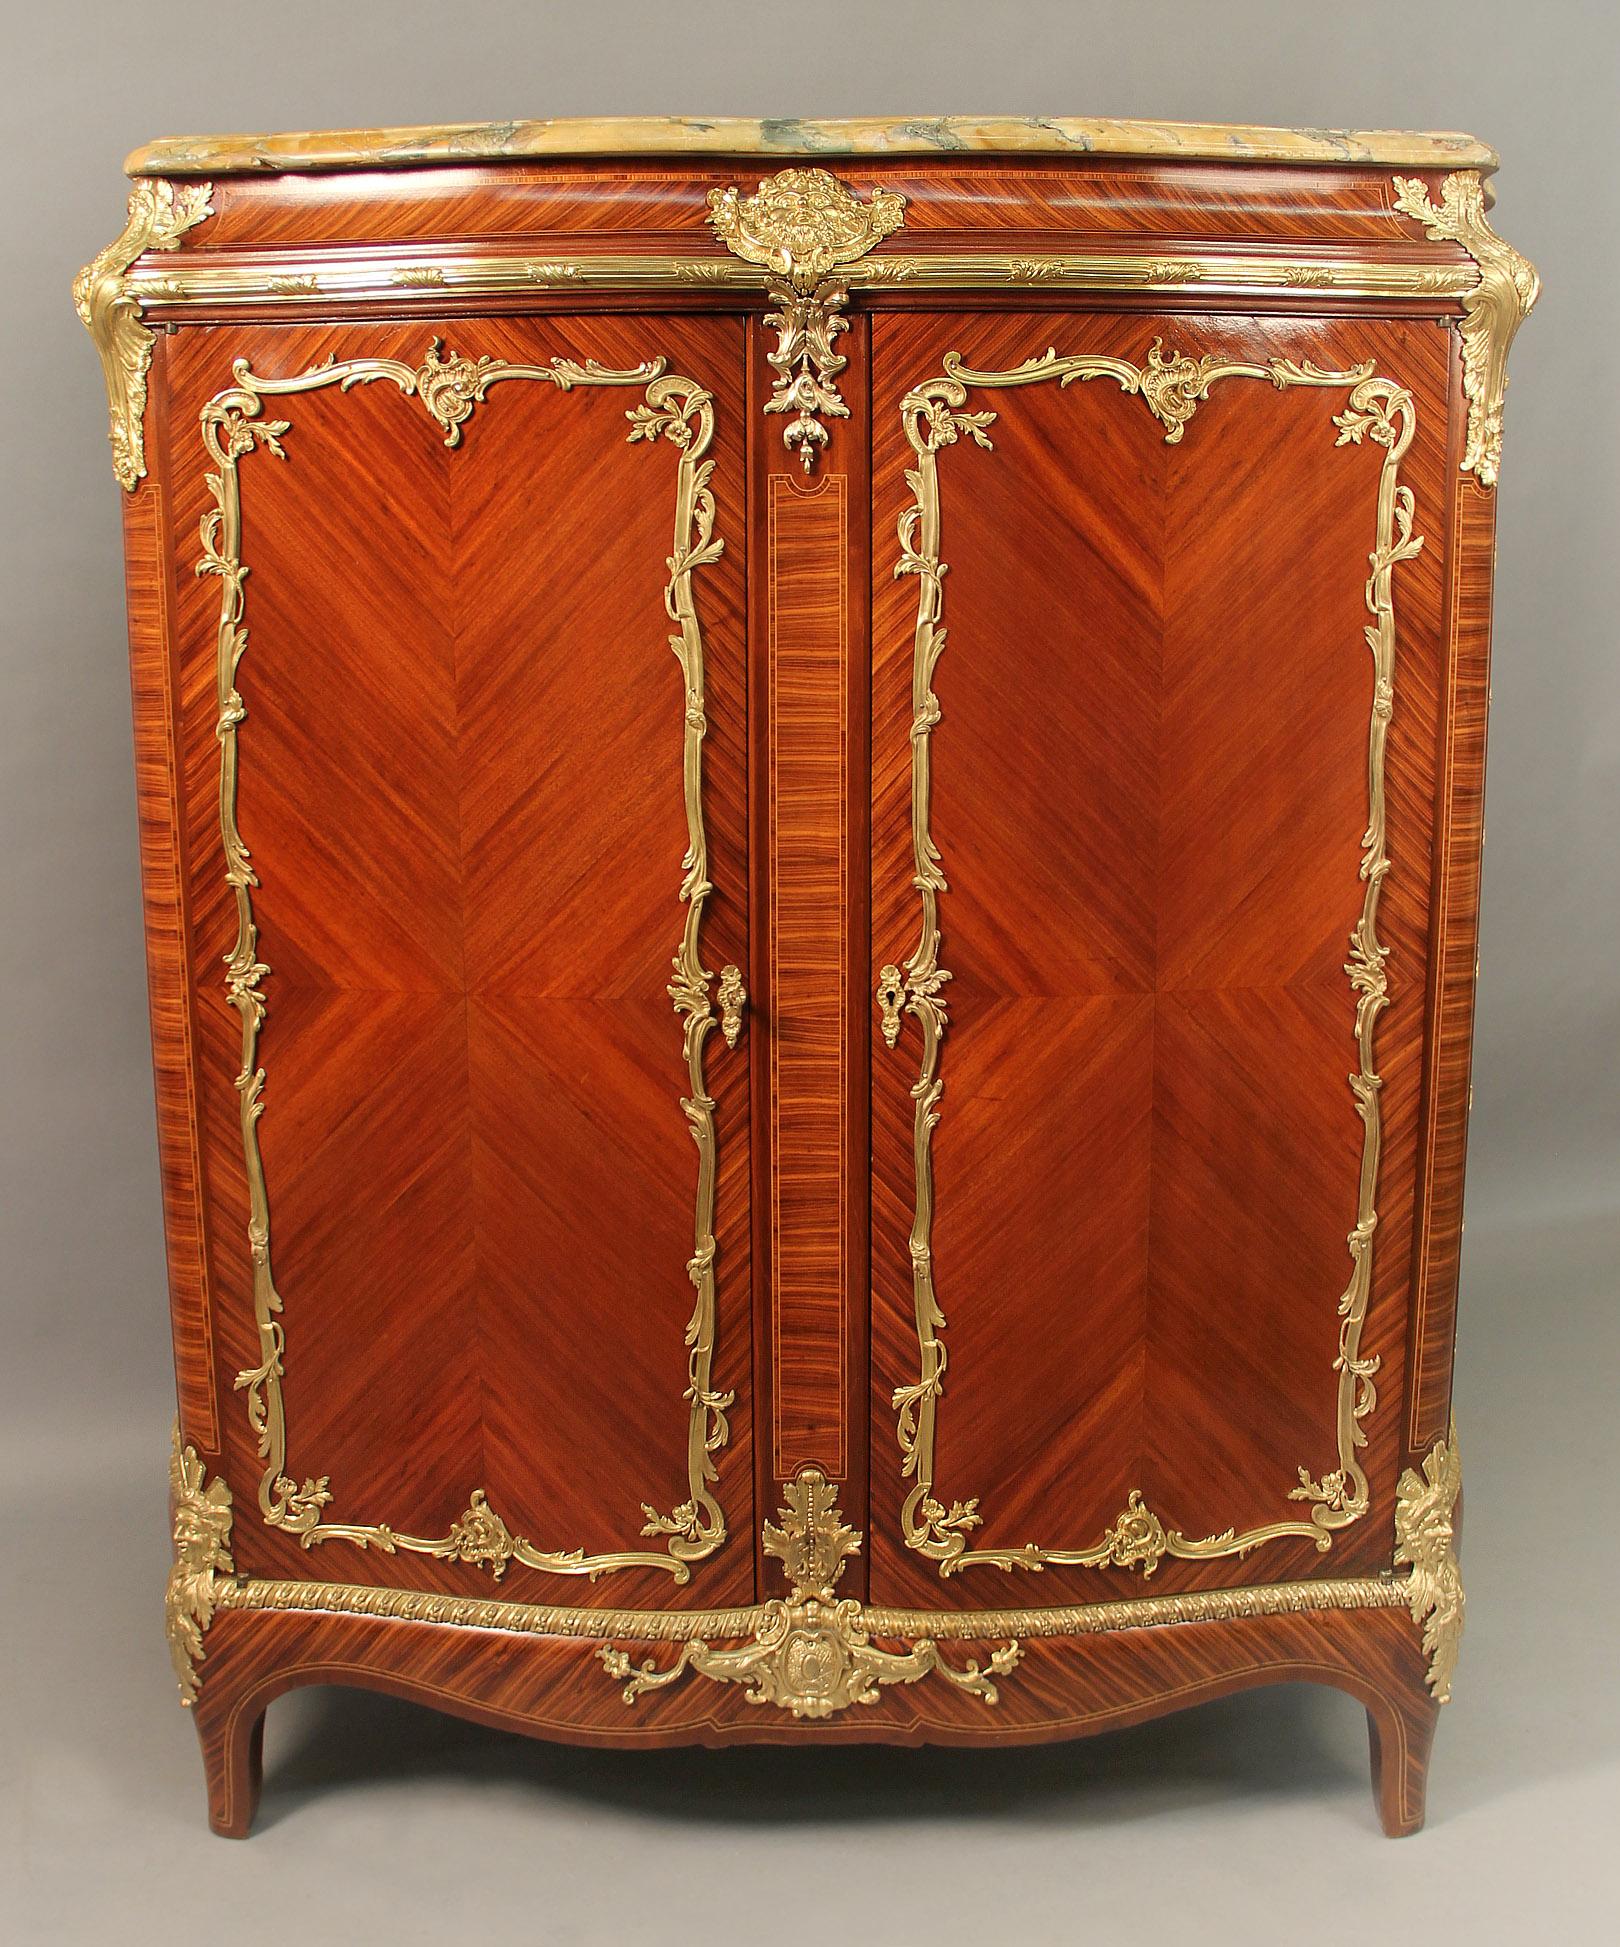 Belle Époque Fine Late 19th Century Gilt Bronze Mounted Tall Cabinet by François Linke For Sale